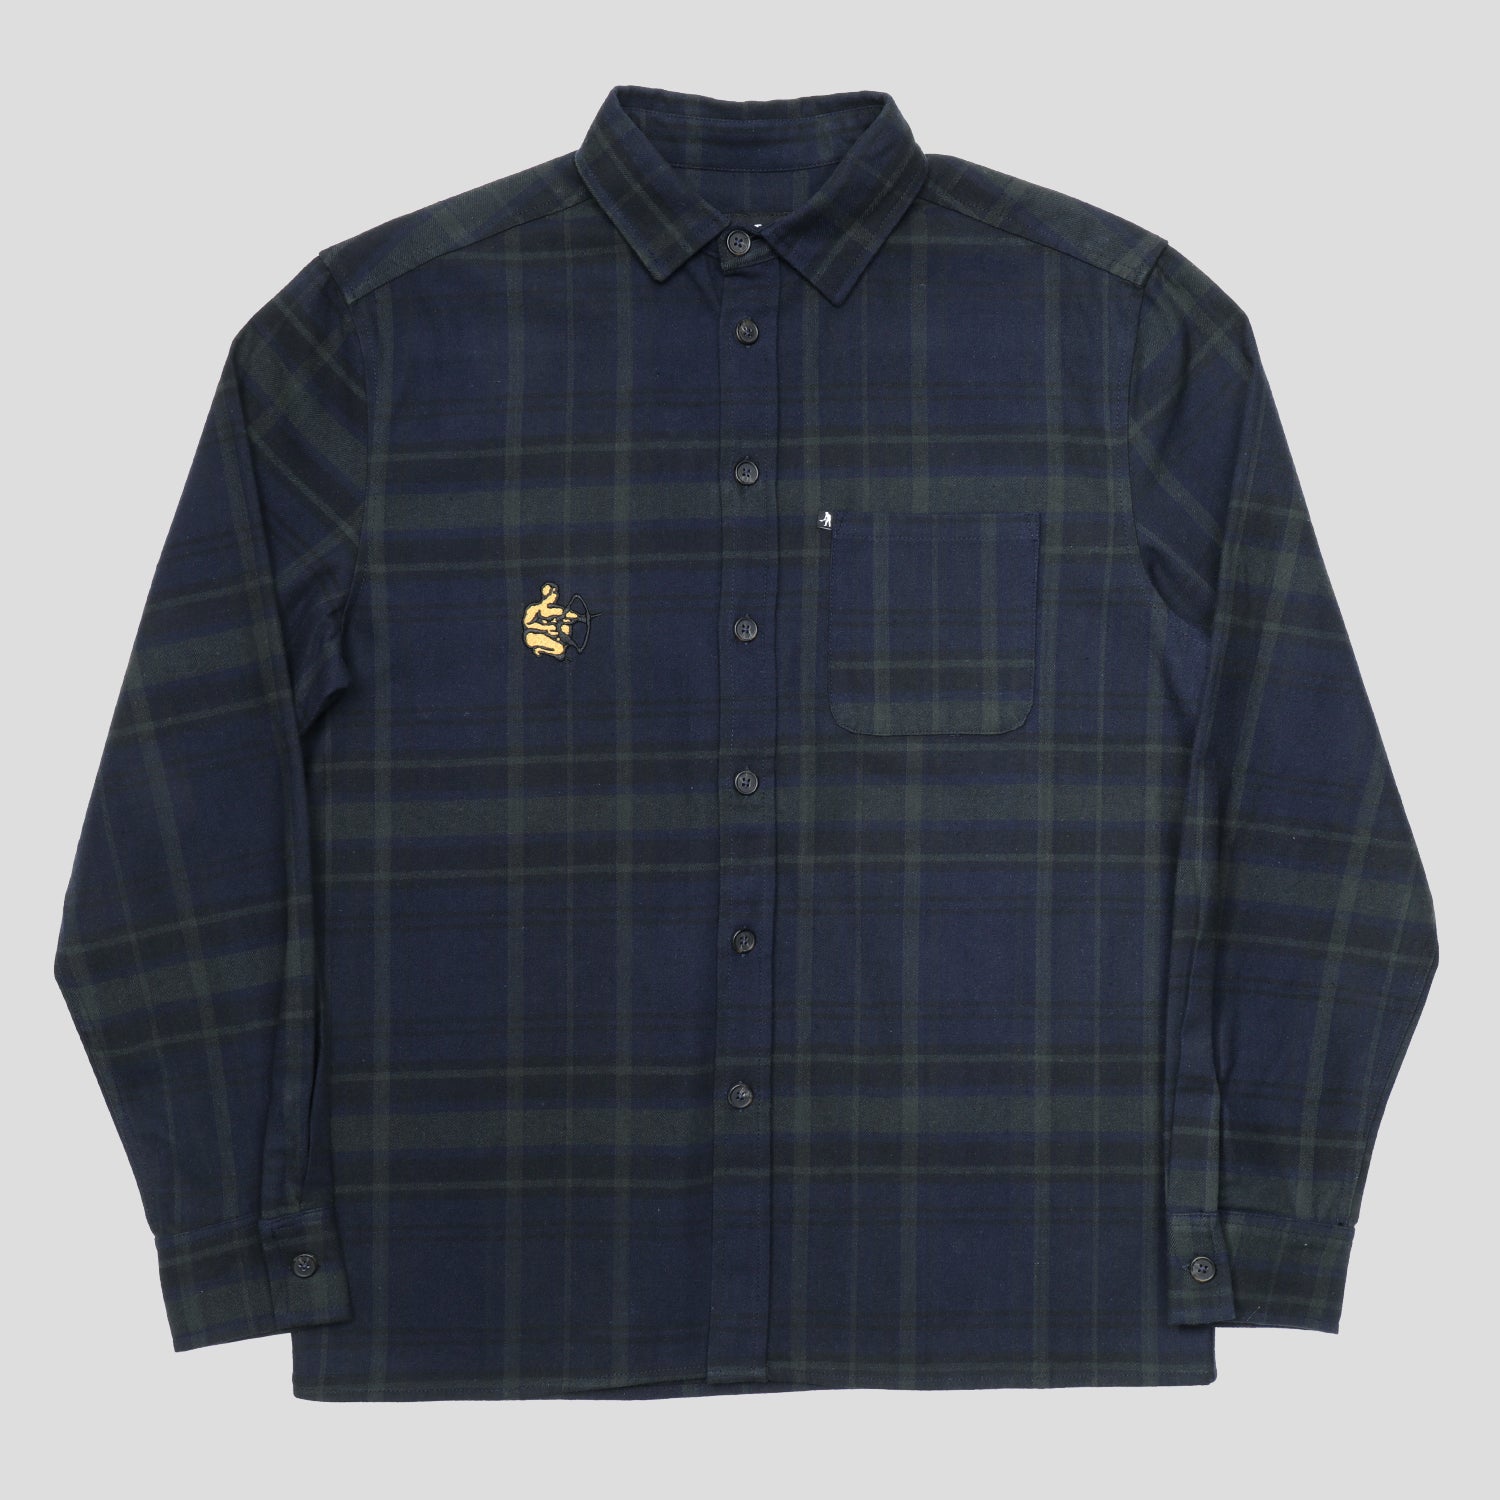 Pass~Port Potters Mark Workers Flannel - Navy